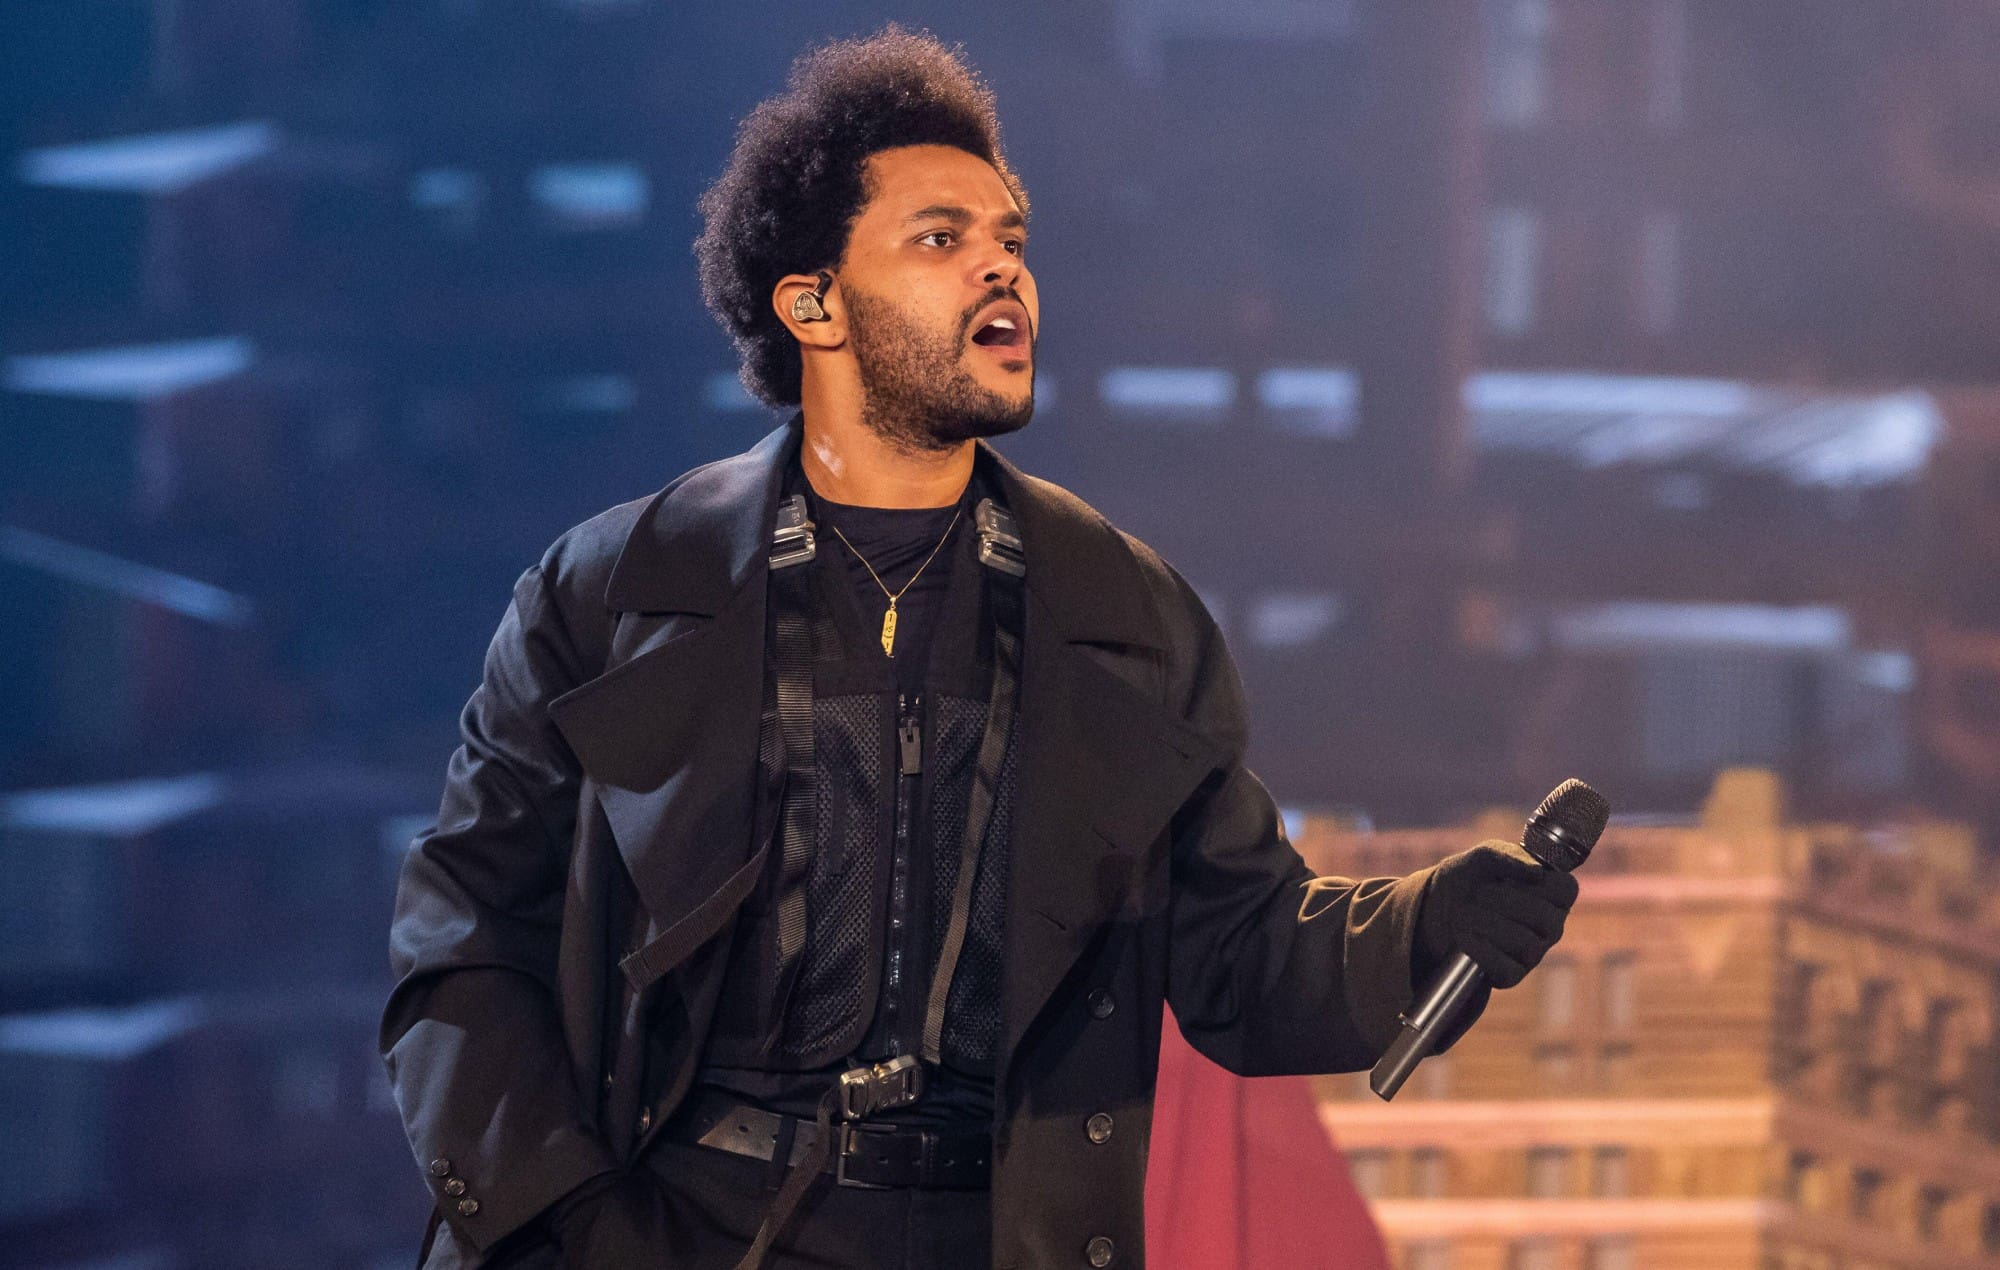 The Weeknd Is ‘Statistically’ The Most Popular Artist In The World, According To Guinness World Records [Photo]